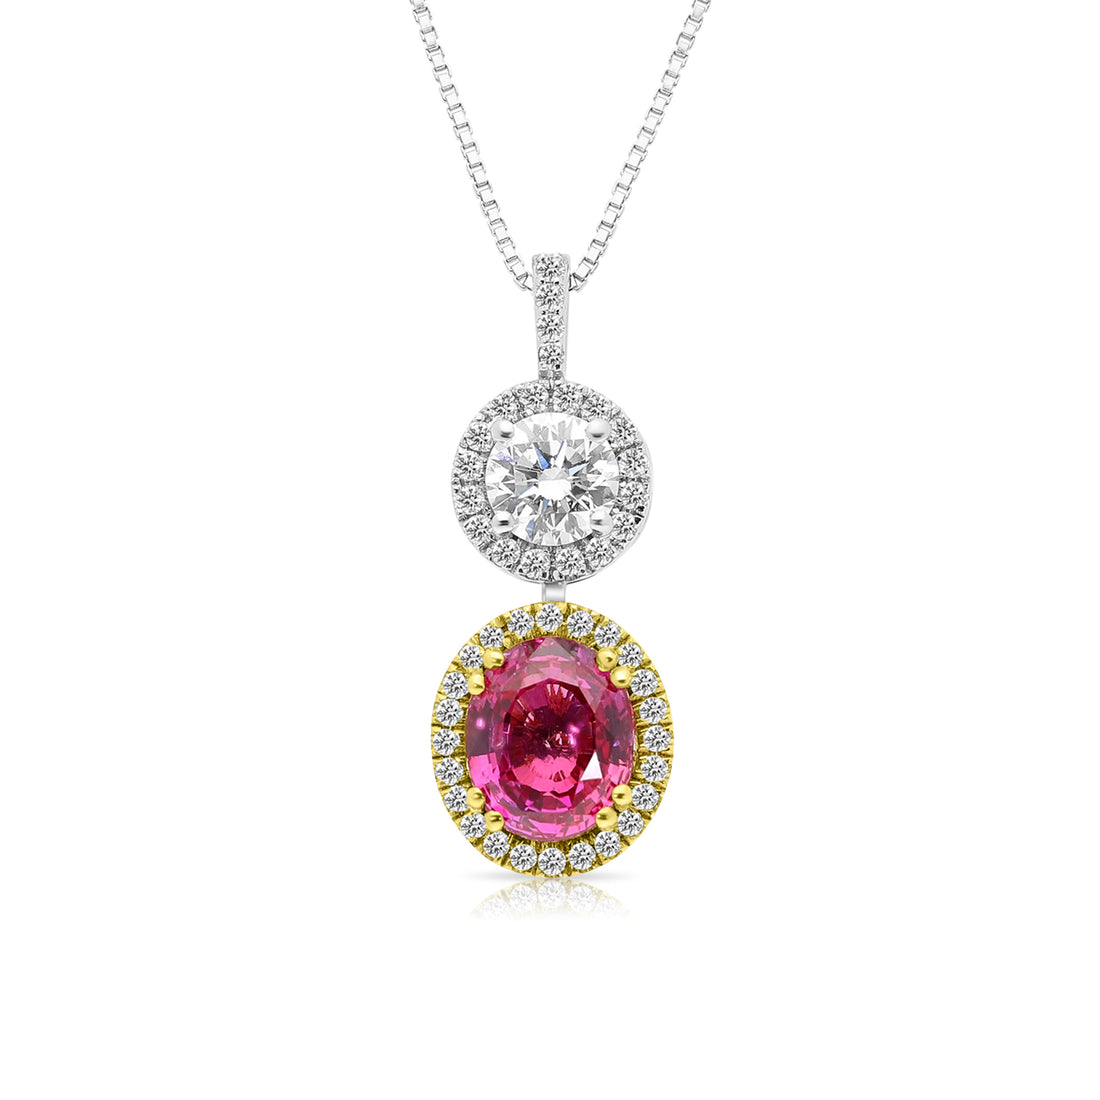 Pink Sapphire and Diamond Two Stone Necklace - 2.86 Carat